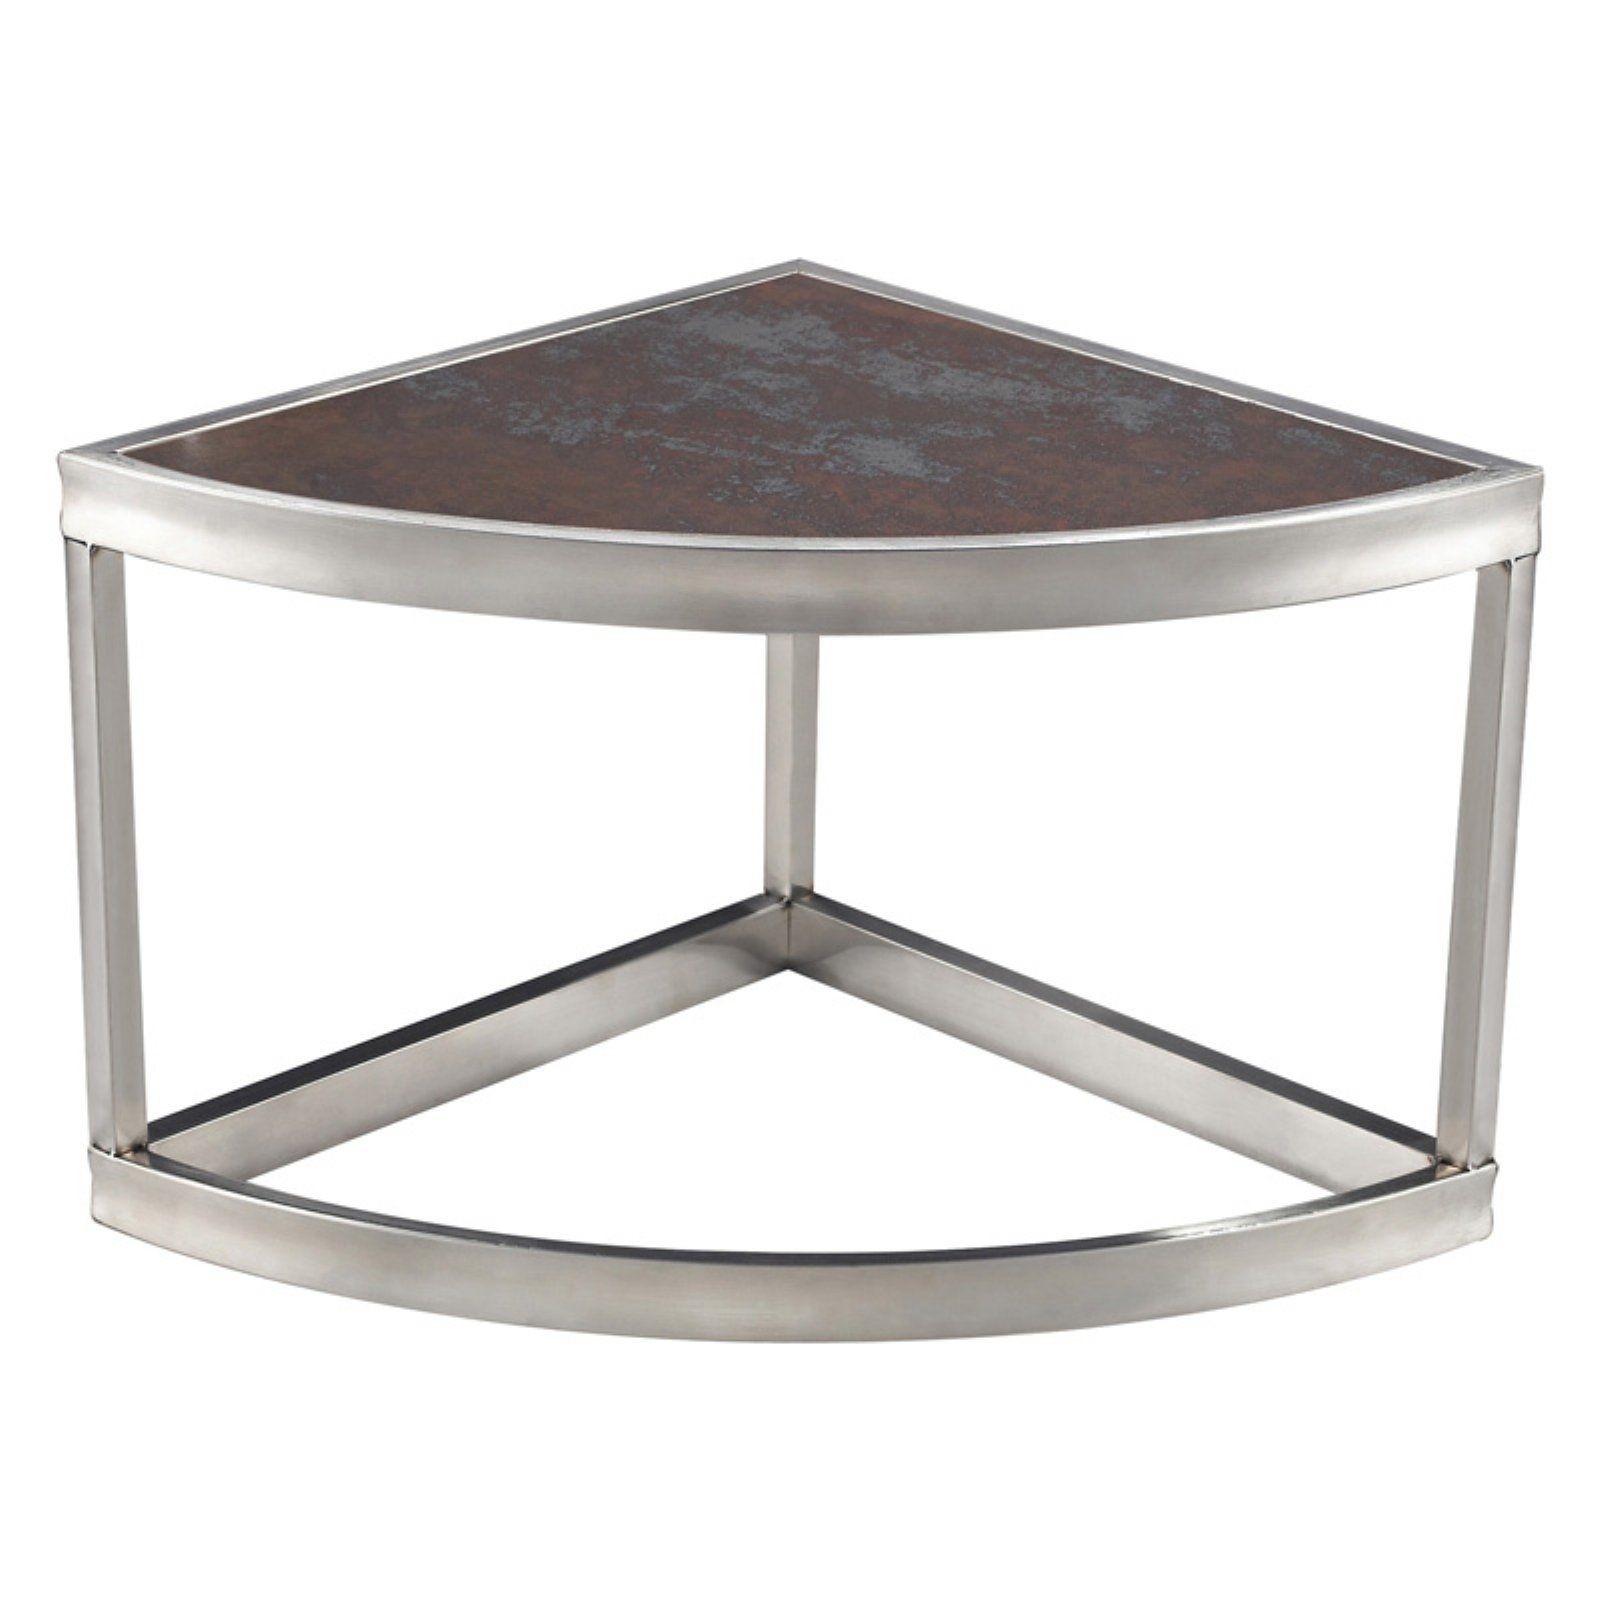 Sterling Industries Sorrento 14 Inch Triangle Corner Table in Stainless Steel